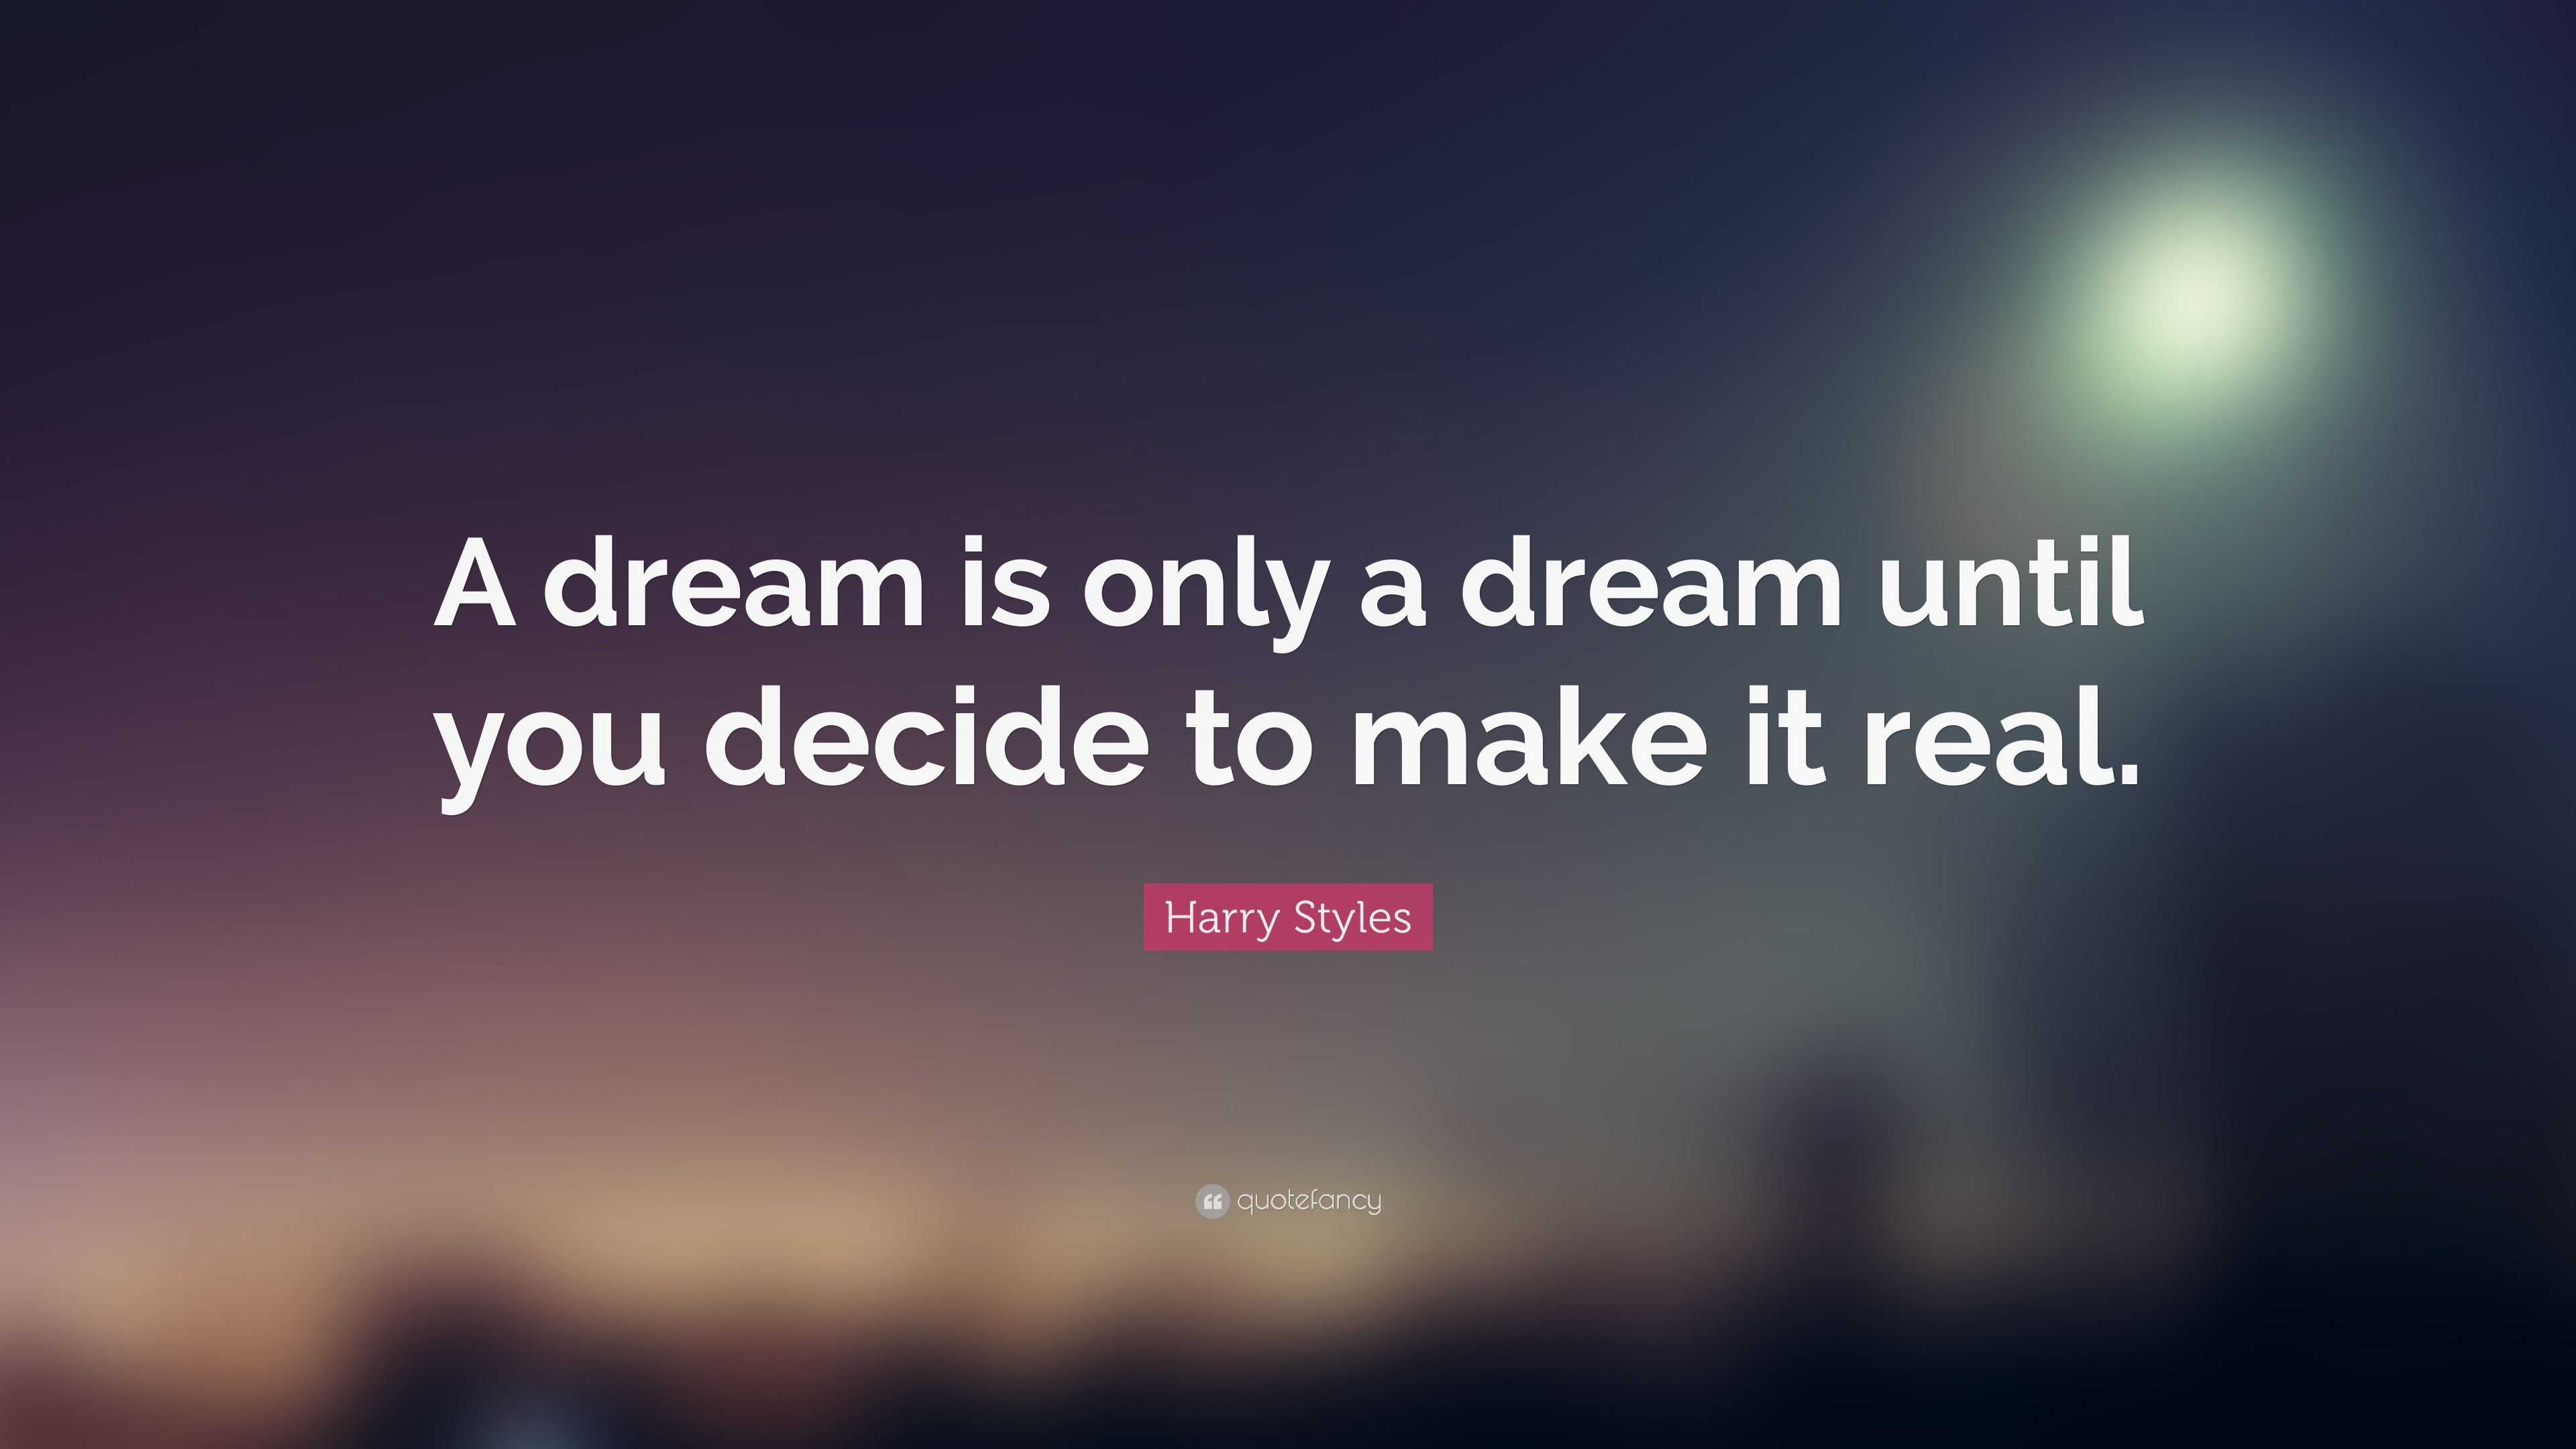 26655 Harry Styles Quote A dream is only a dream until you decide to